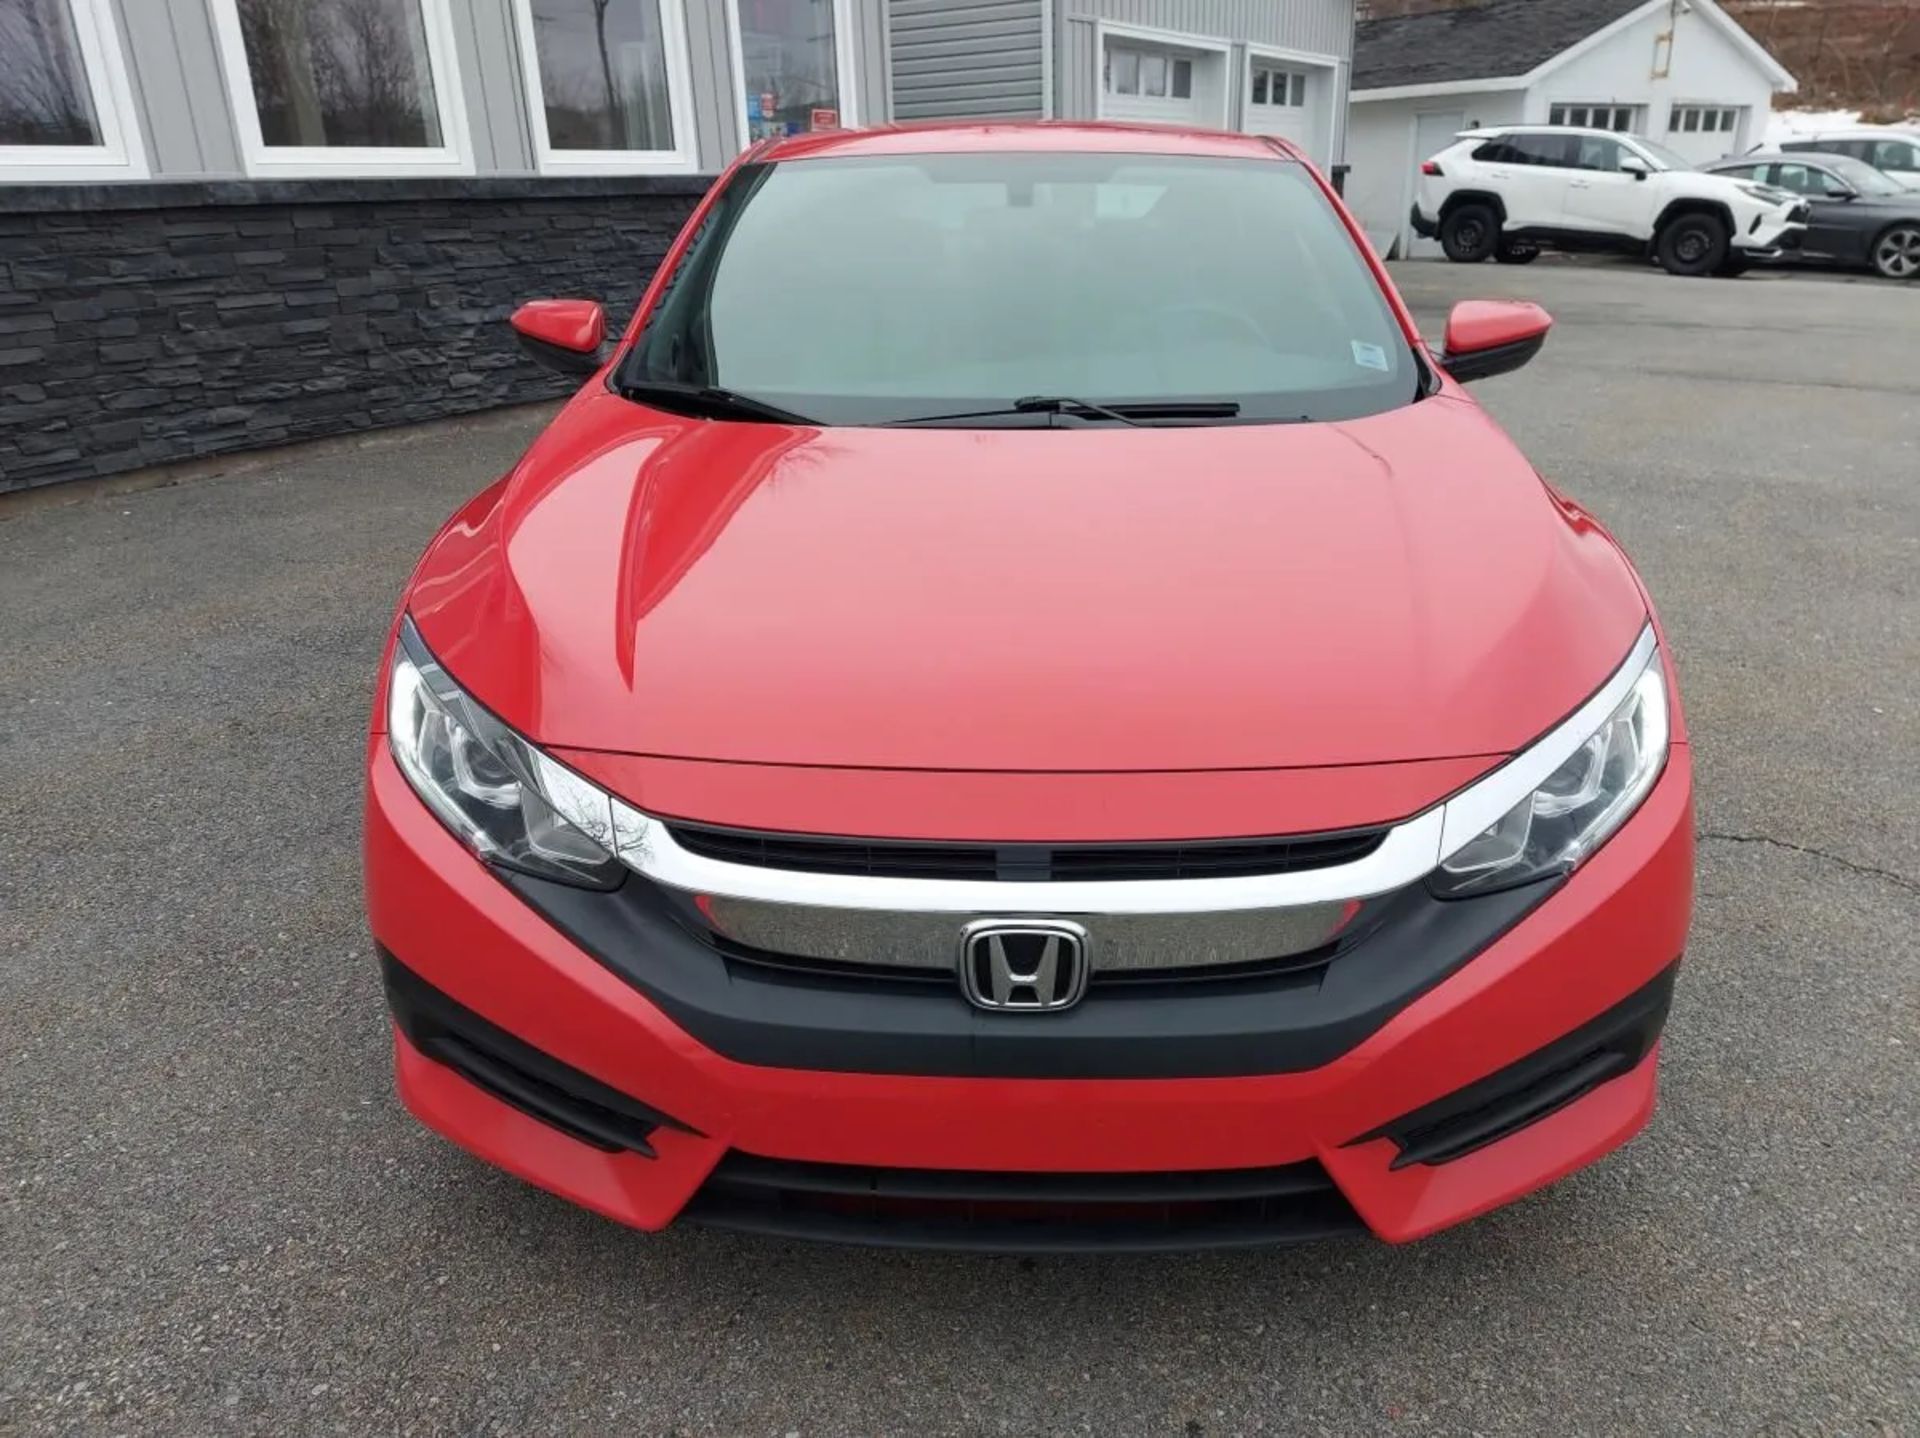 2017 HONDA CIVIC COUPE LX COUPE 6 SPEED! UNDERCOATED! DEALER SERVICED! - Image 2 of 28